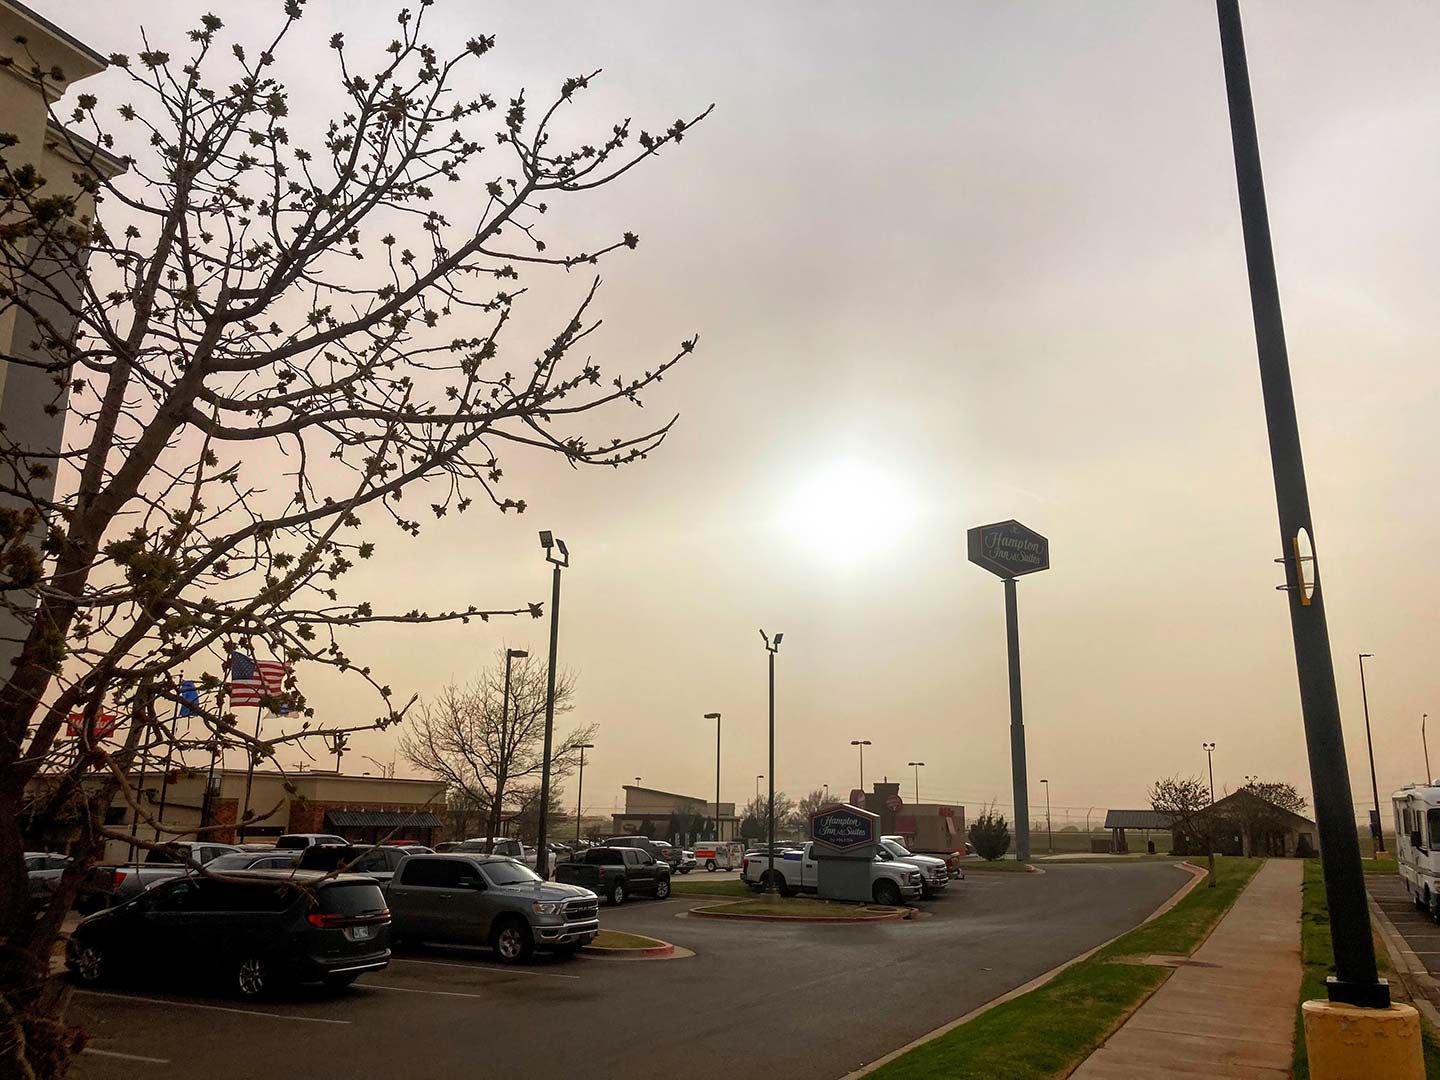 The sun tries in vain to shine through the dust in Elk City, Oklahoma.